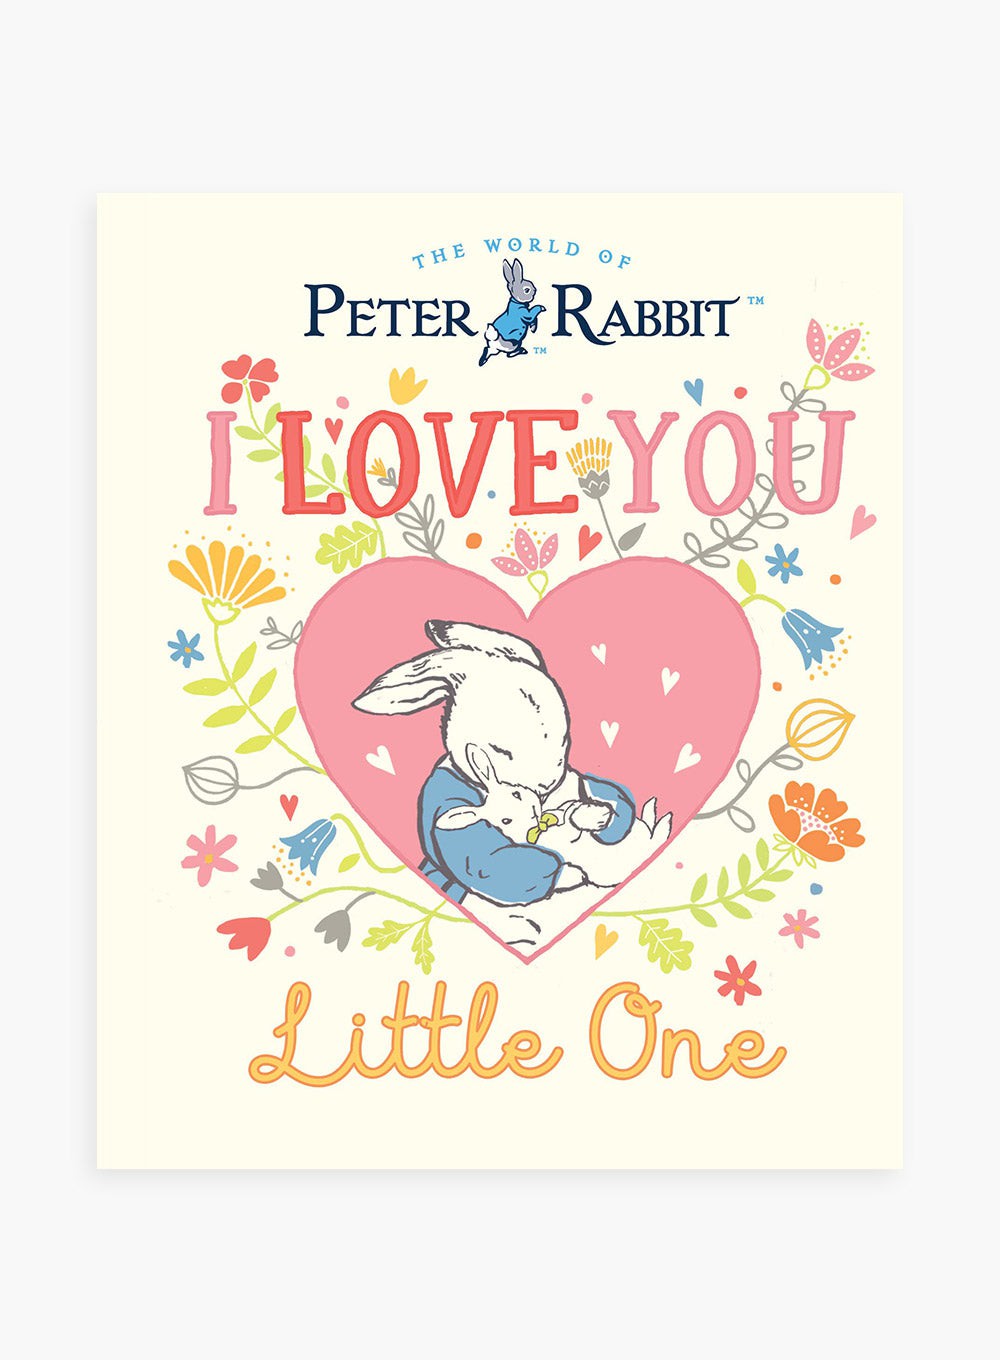 The World of Peter Rabbit Book I Love You Little One